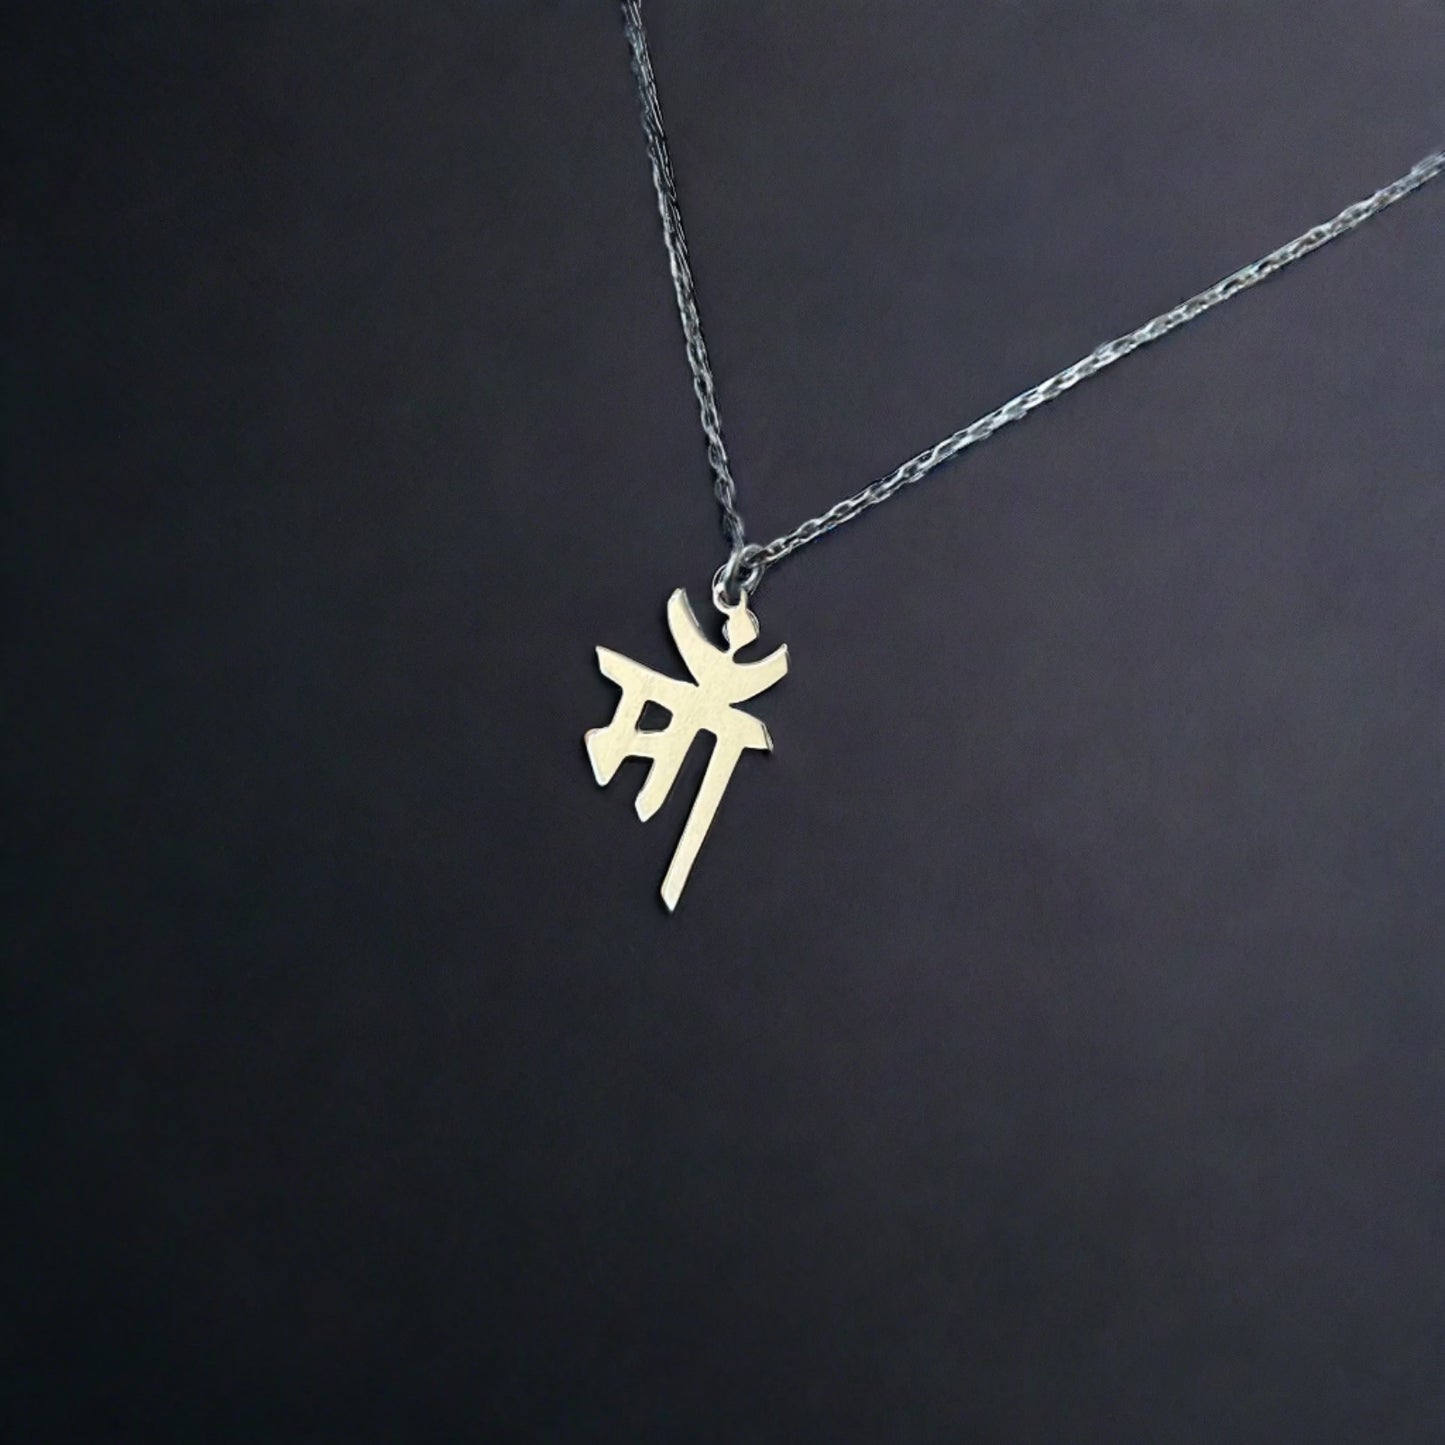 Ma Necklace in Hindi font in 925 Sterling Silver